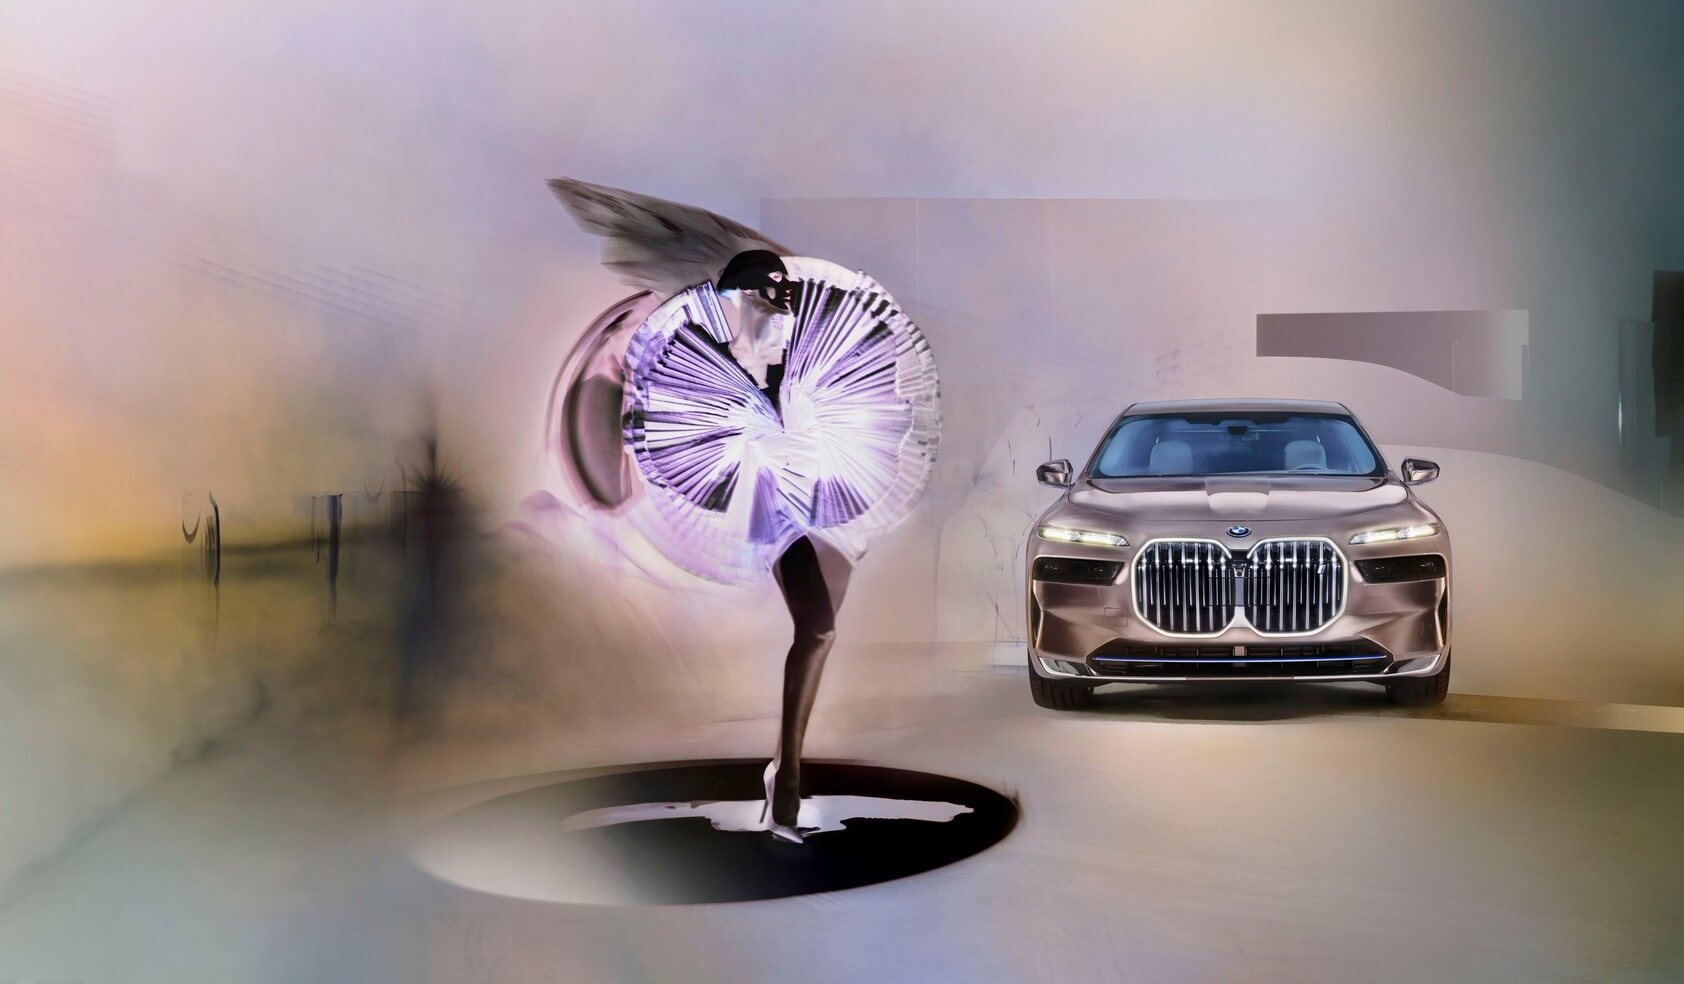 BMW 7 Series photographed by Nick Knight 2